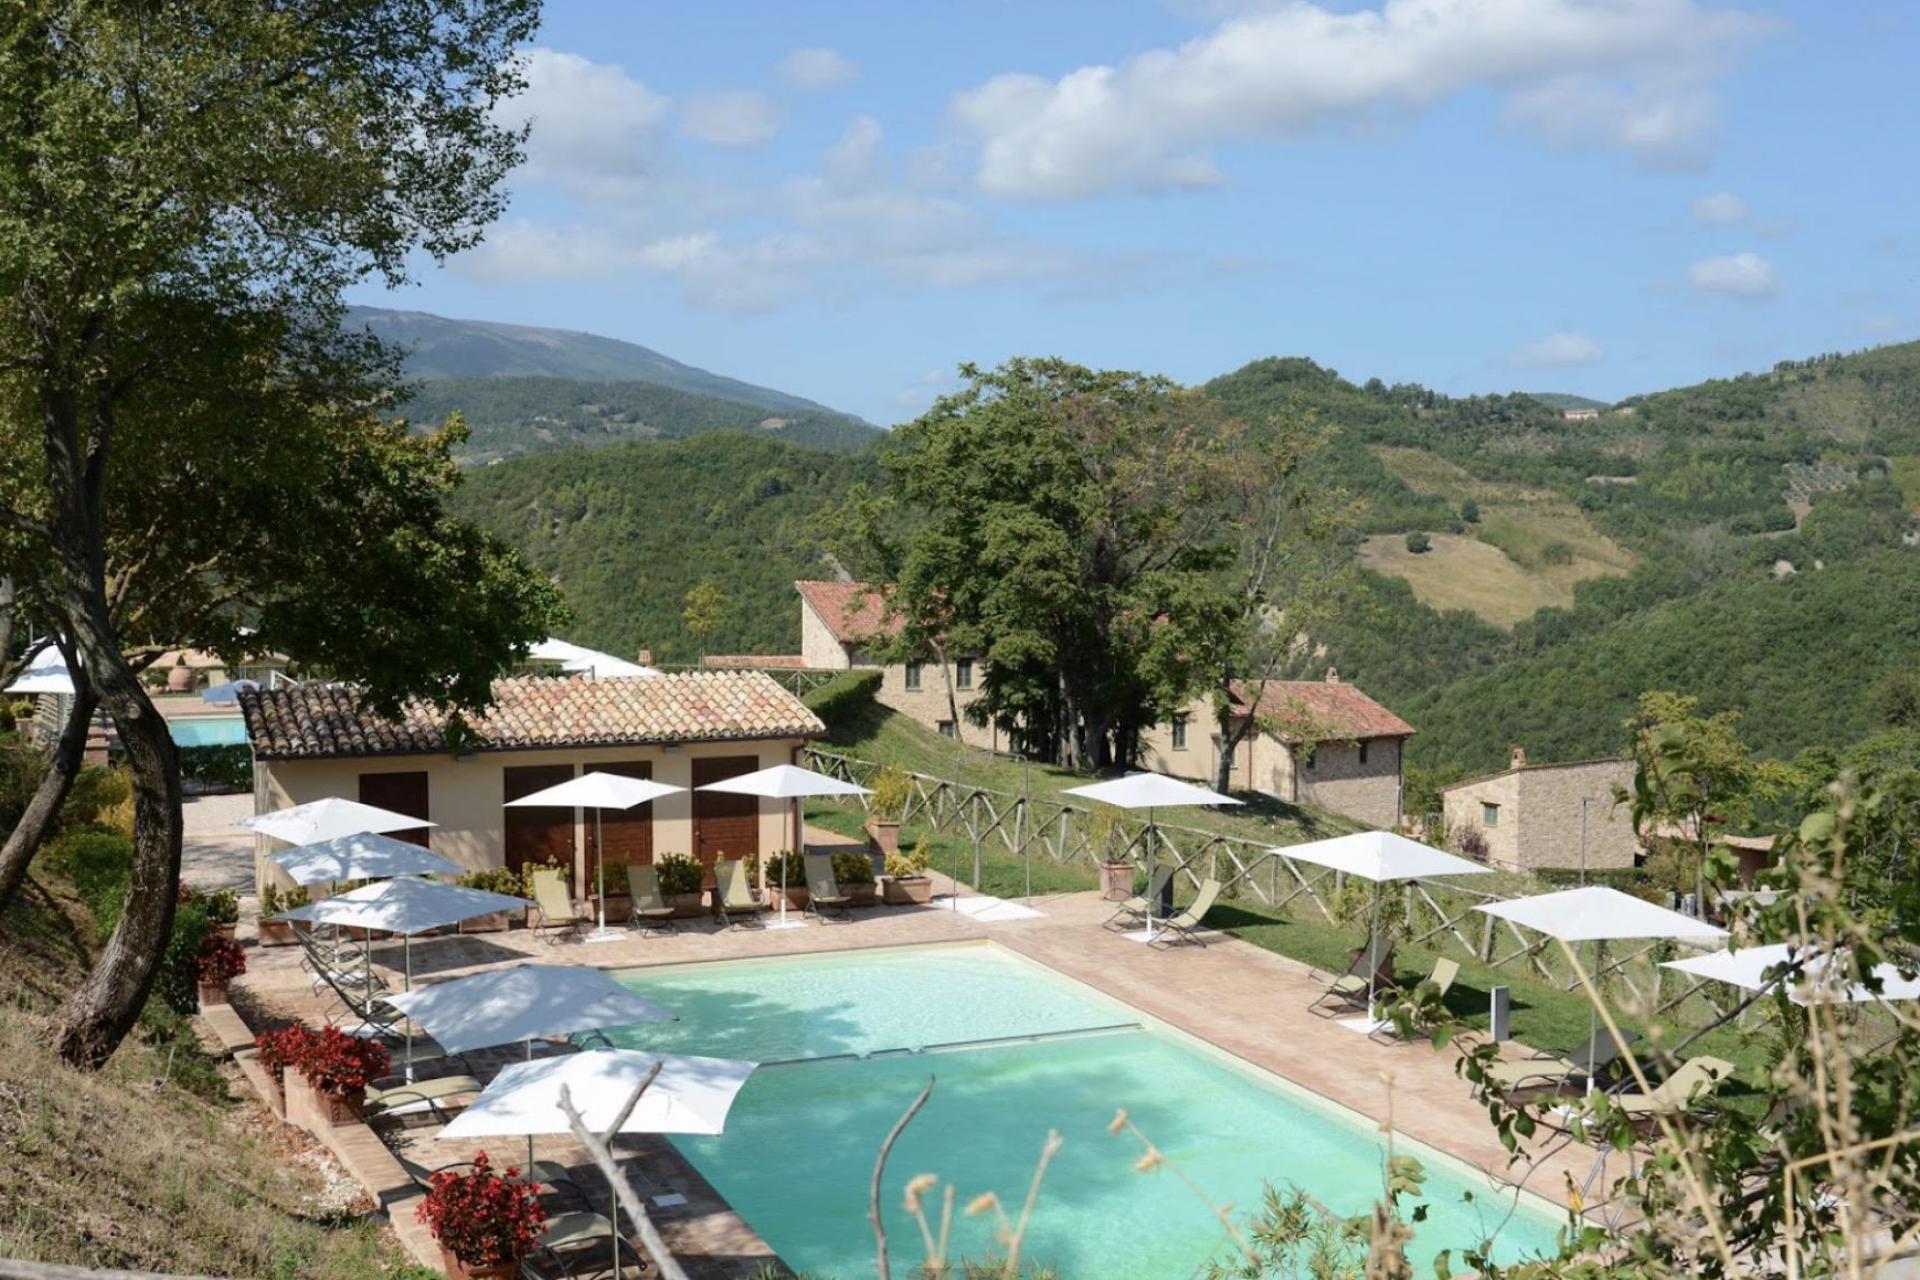 Beautiful family resort on a hill top in Umbria